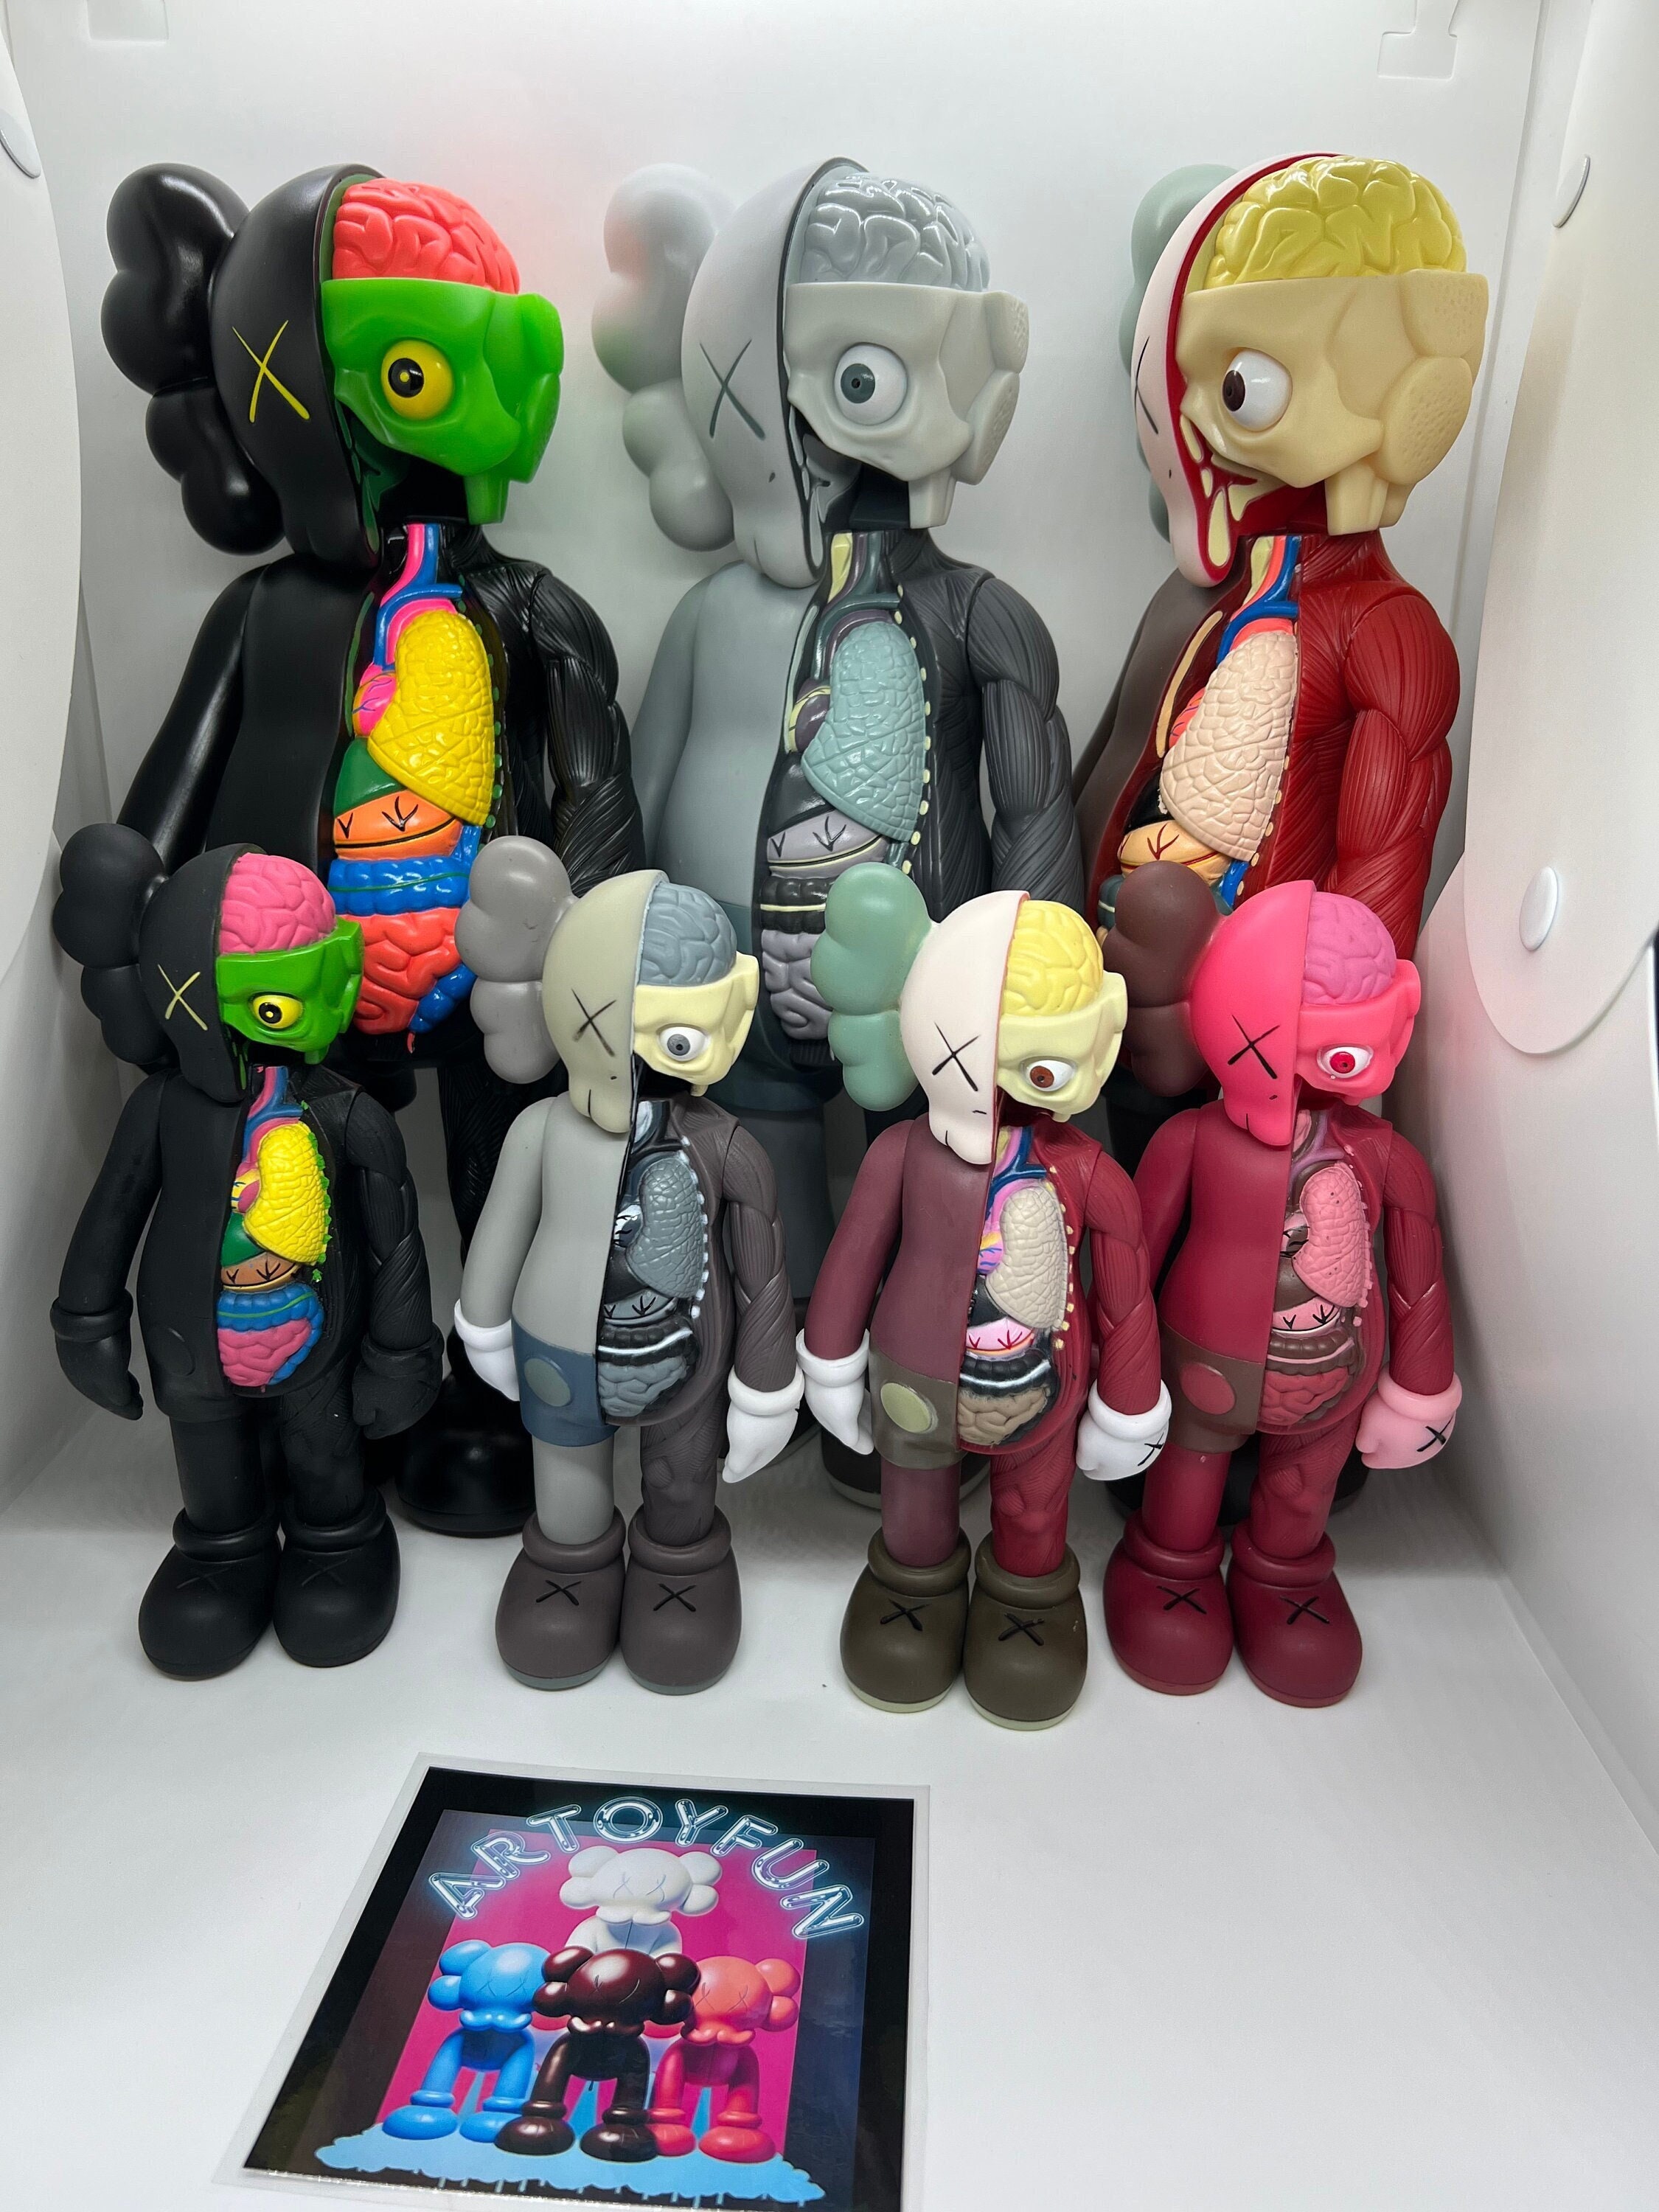 Buy Figurine Kaws Online In India -  India